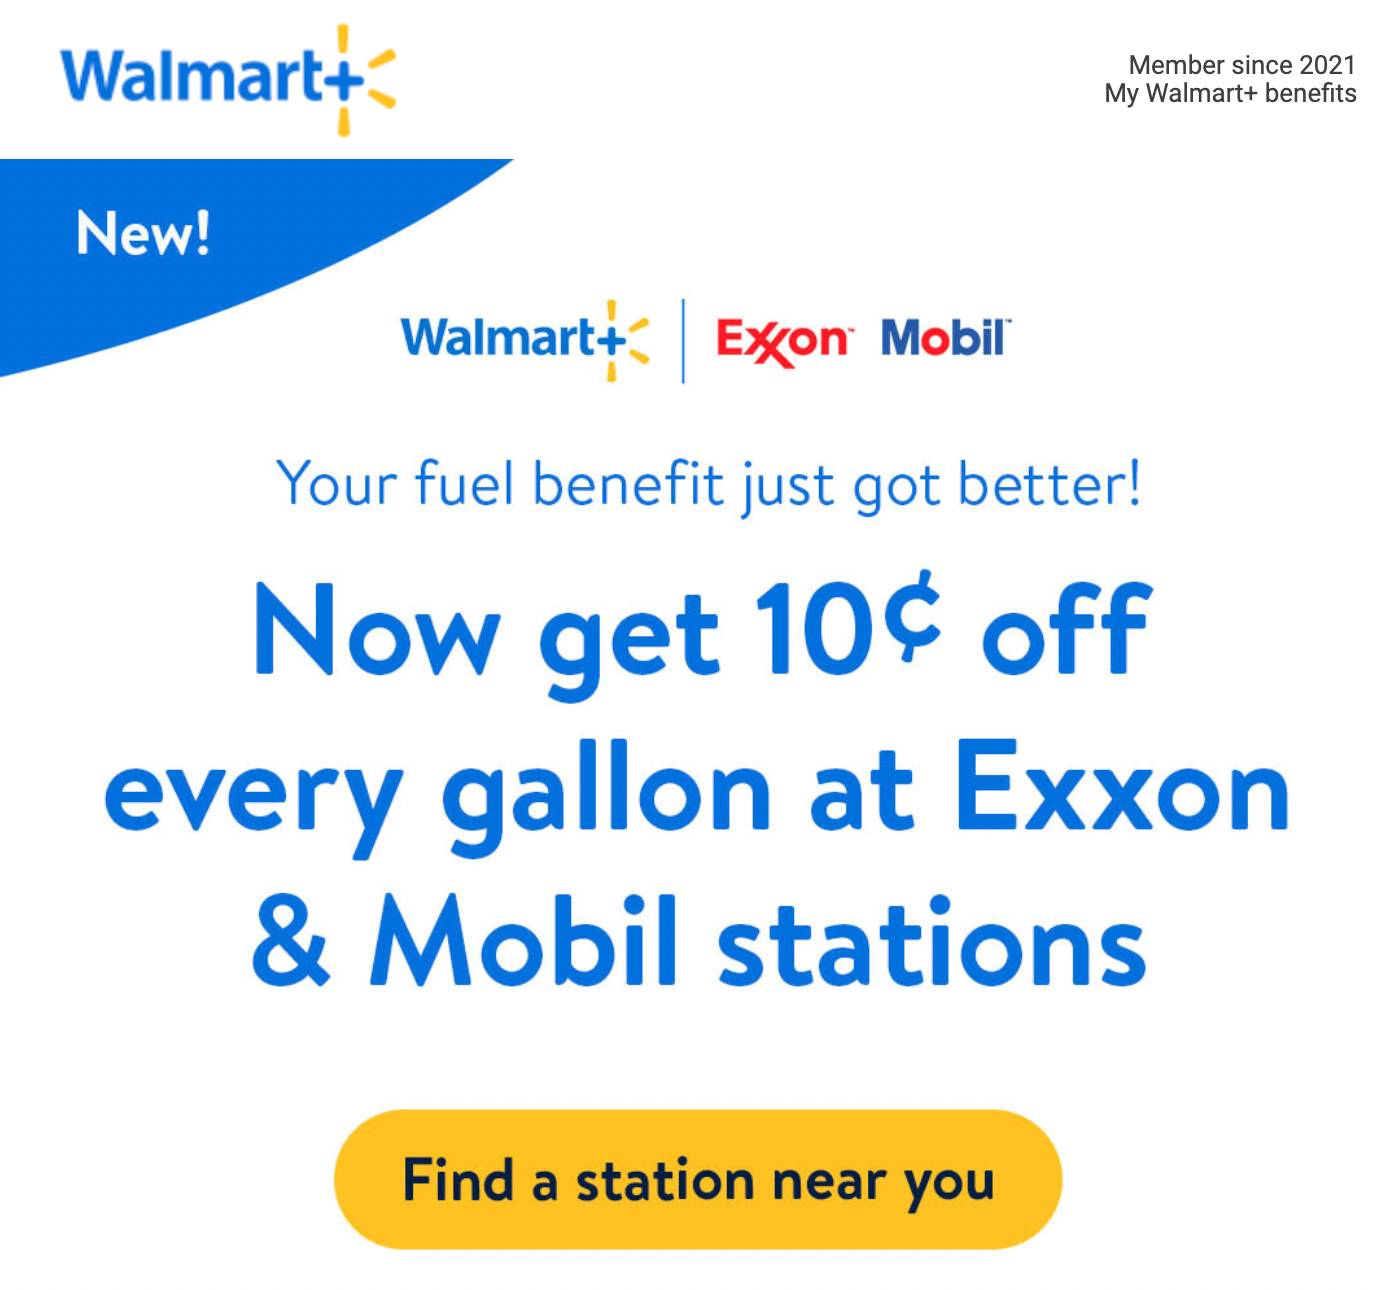 You are currently viewing Deal alert: Save up to 20 cents per gallon at Mobil and Exxon with Walmart+, included with the Amex Platinum